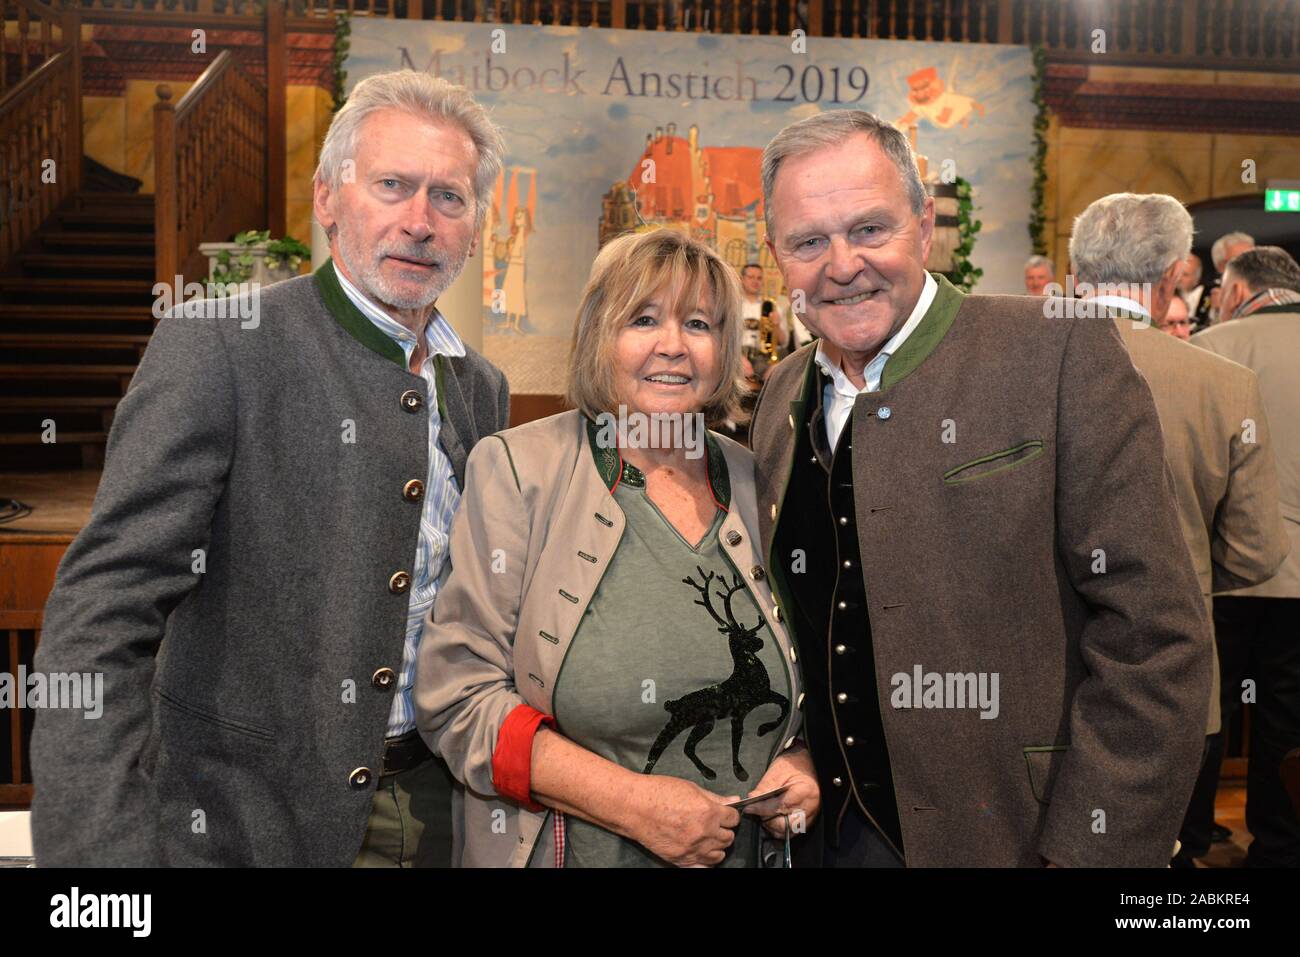 Paul Breitner (l.) with his wife Hildegard and Wolfgang Heubisch in the Munich Hofbräuhaus at the traditional Maibock tapping 2019 of the Staatliche Hofbräu Brewery. [automated translation] Stock Photo